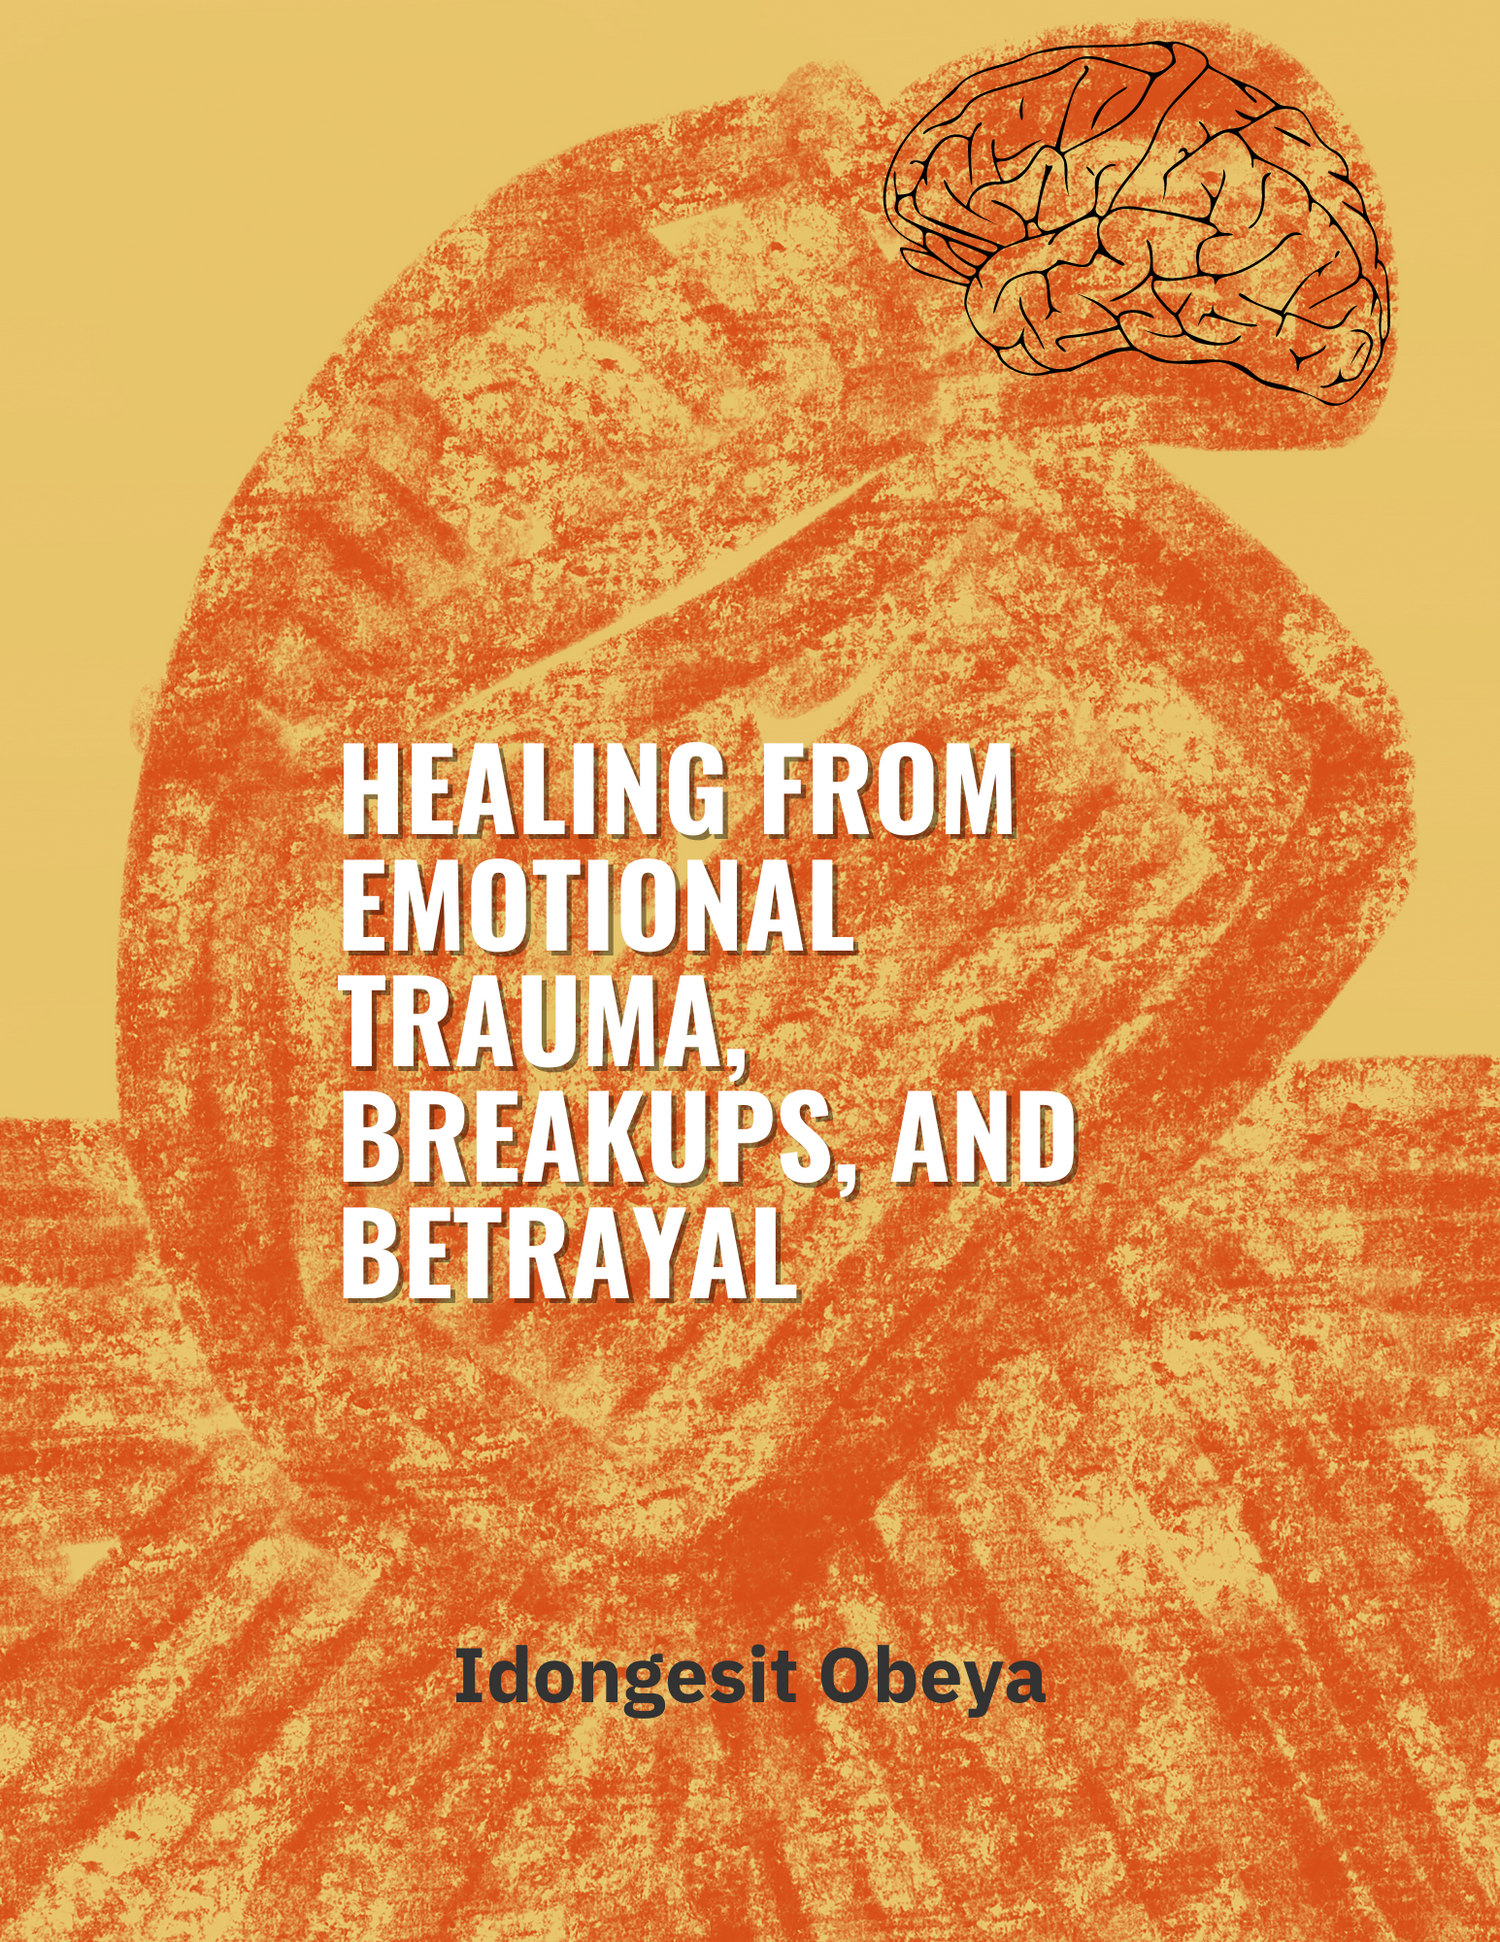 Healing From Emotional Trauma Breakups and Betrayal